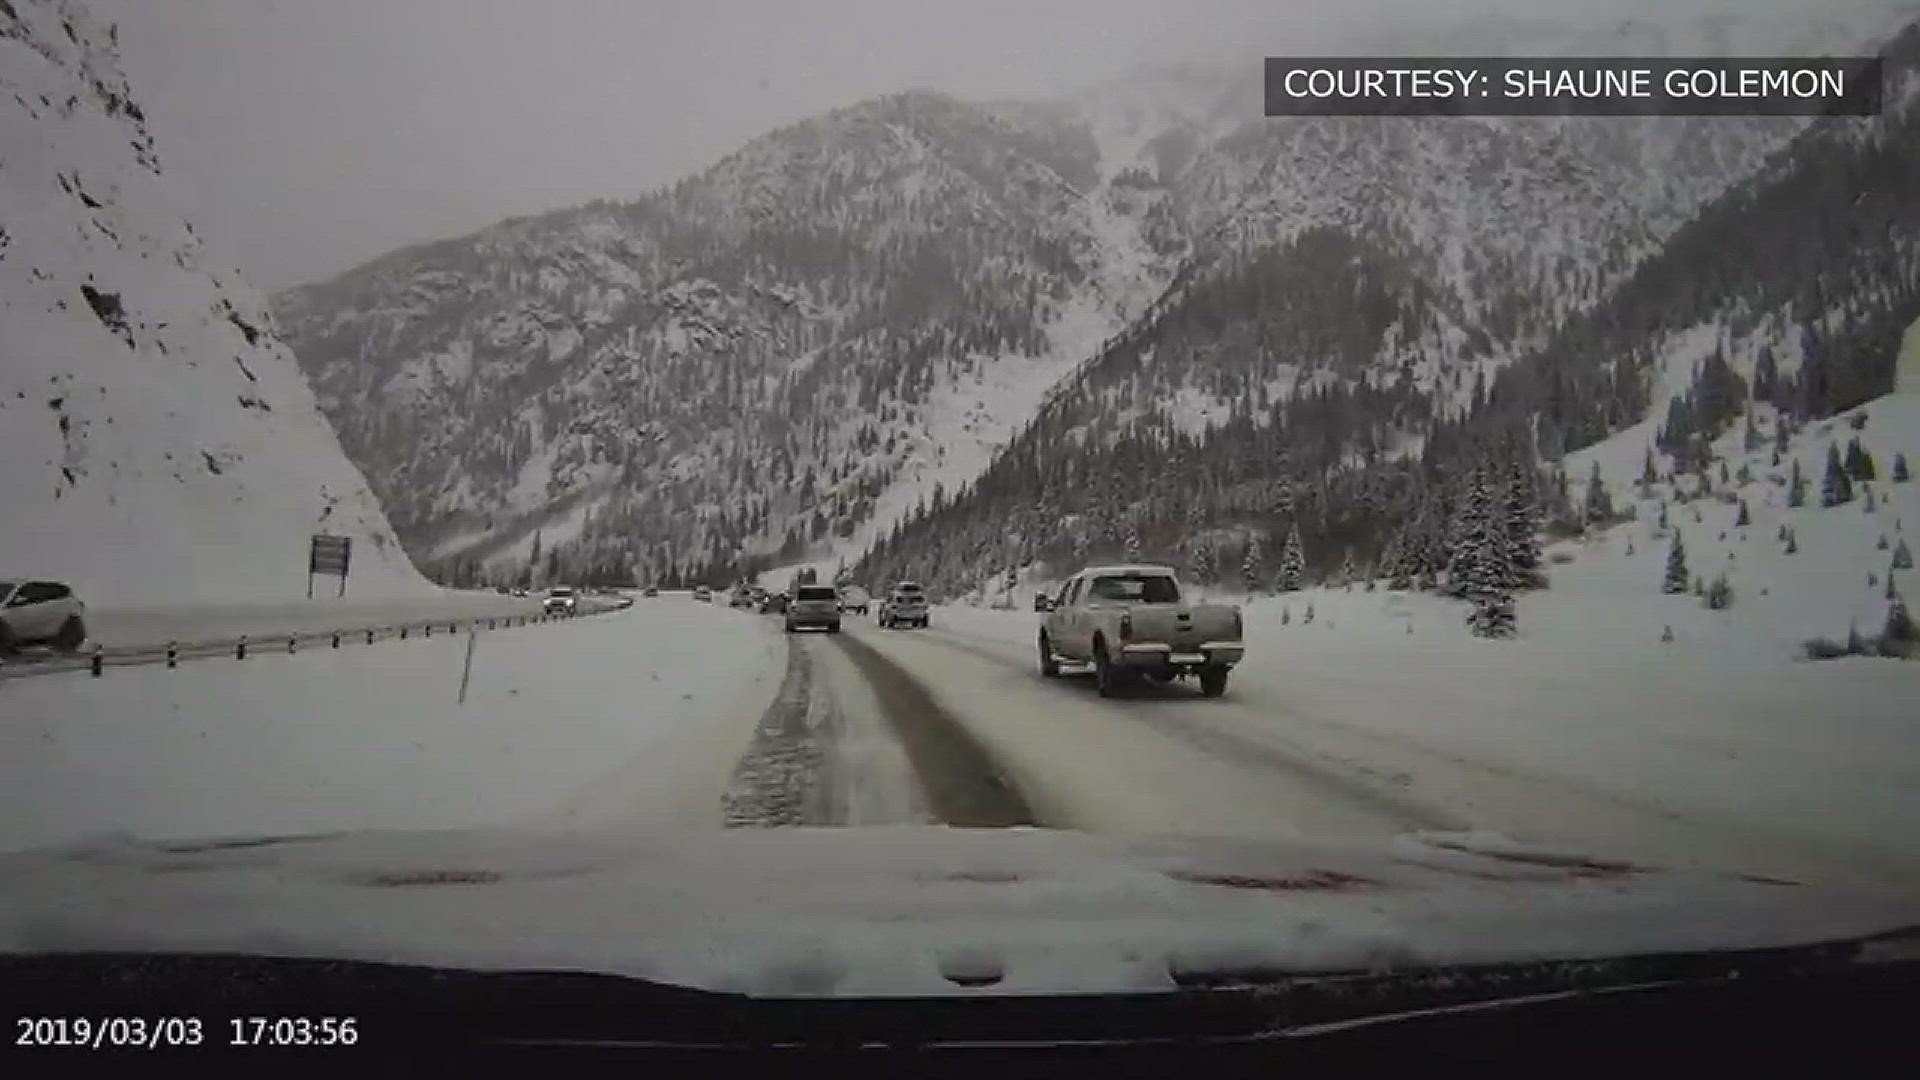 Video from a dash camera shows an avalanche slamming into a vehicle on I-70 around 5 p.m. on Sunday. The driver says they were pushed off the roadway and into the median.